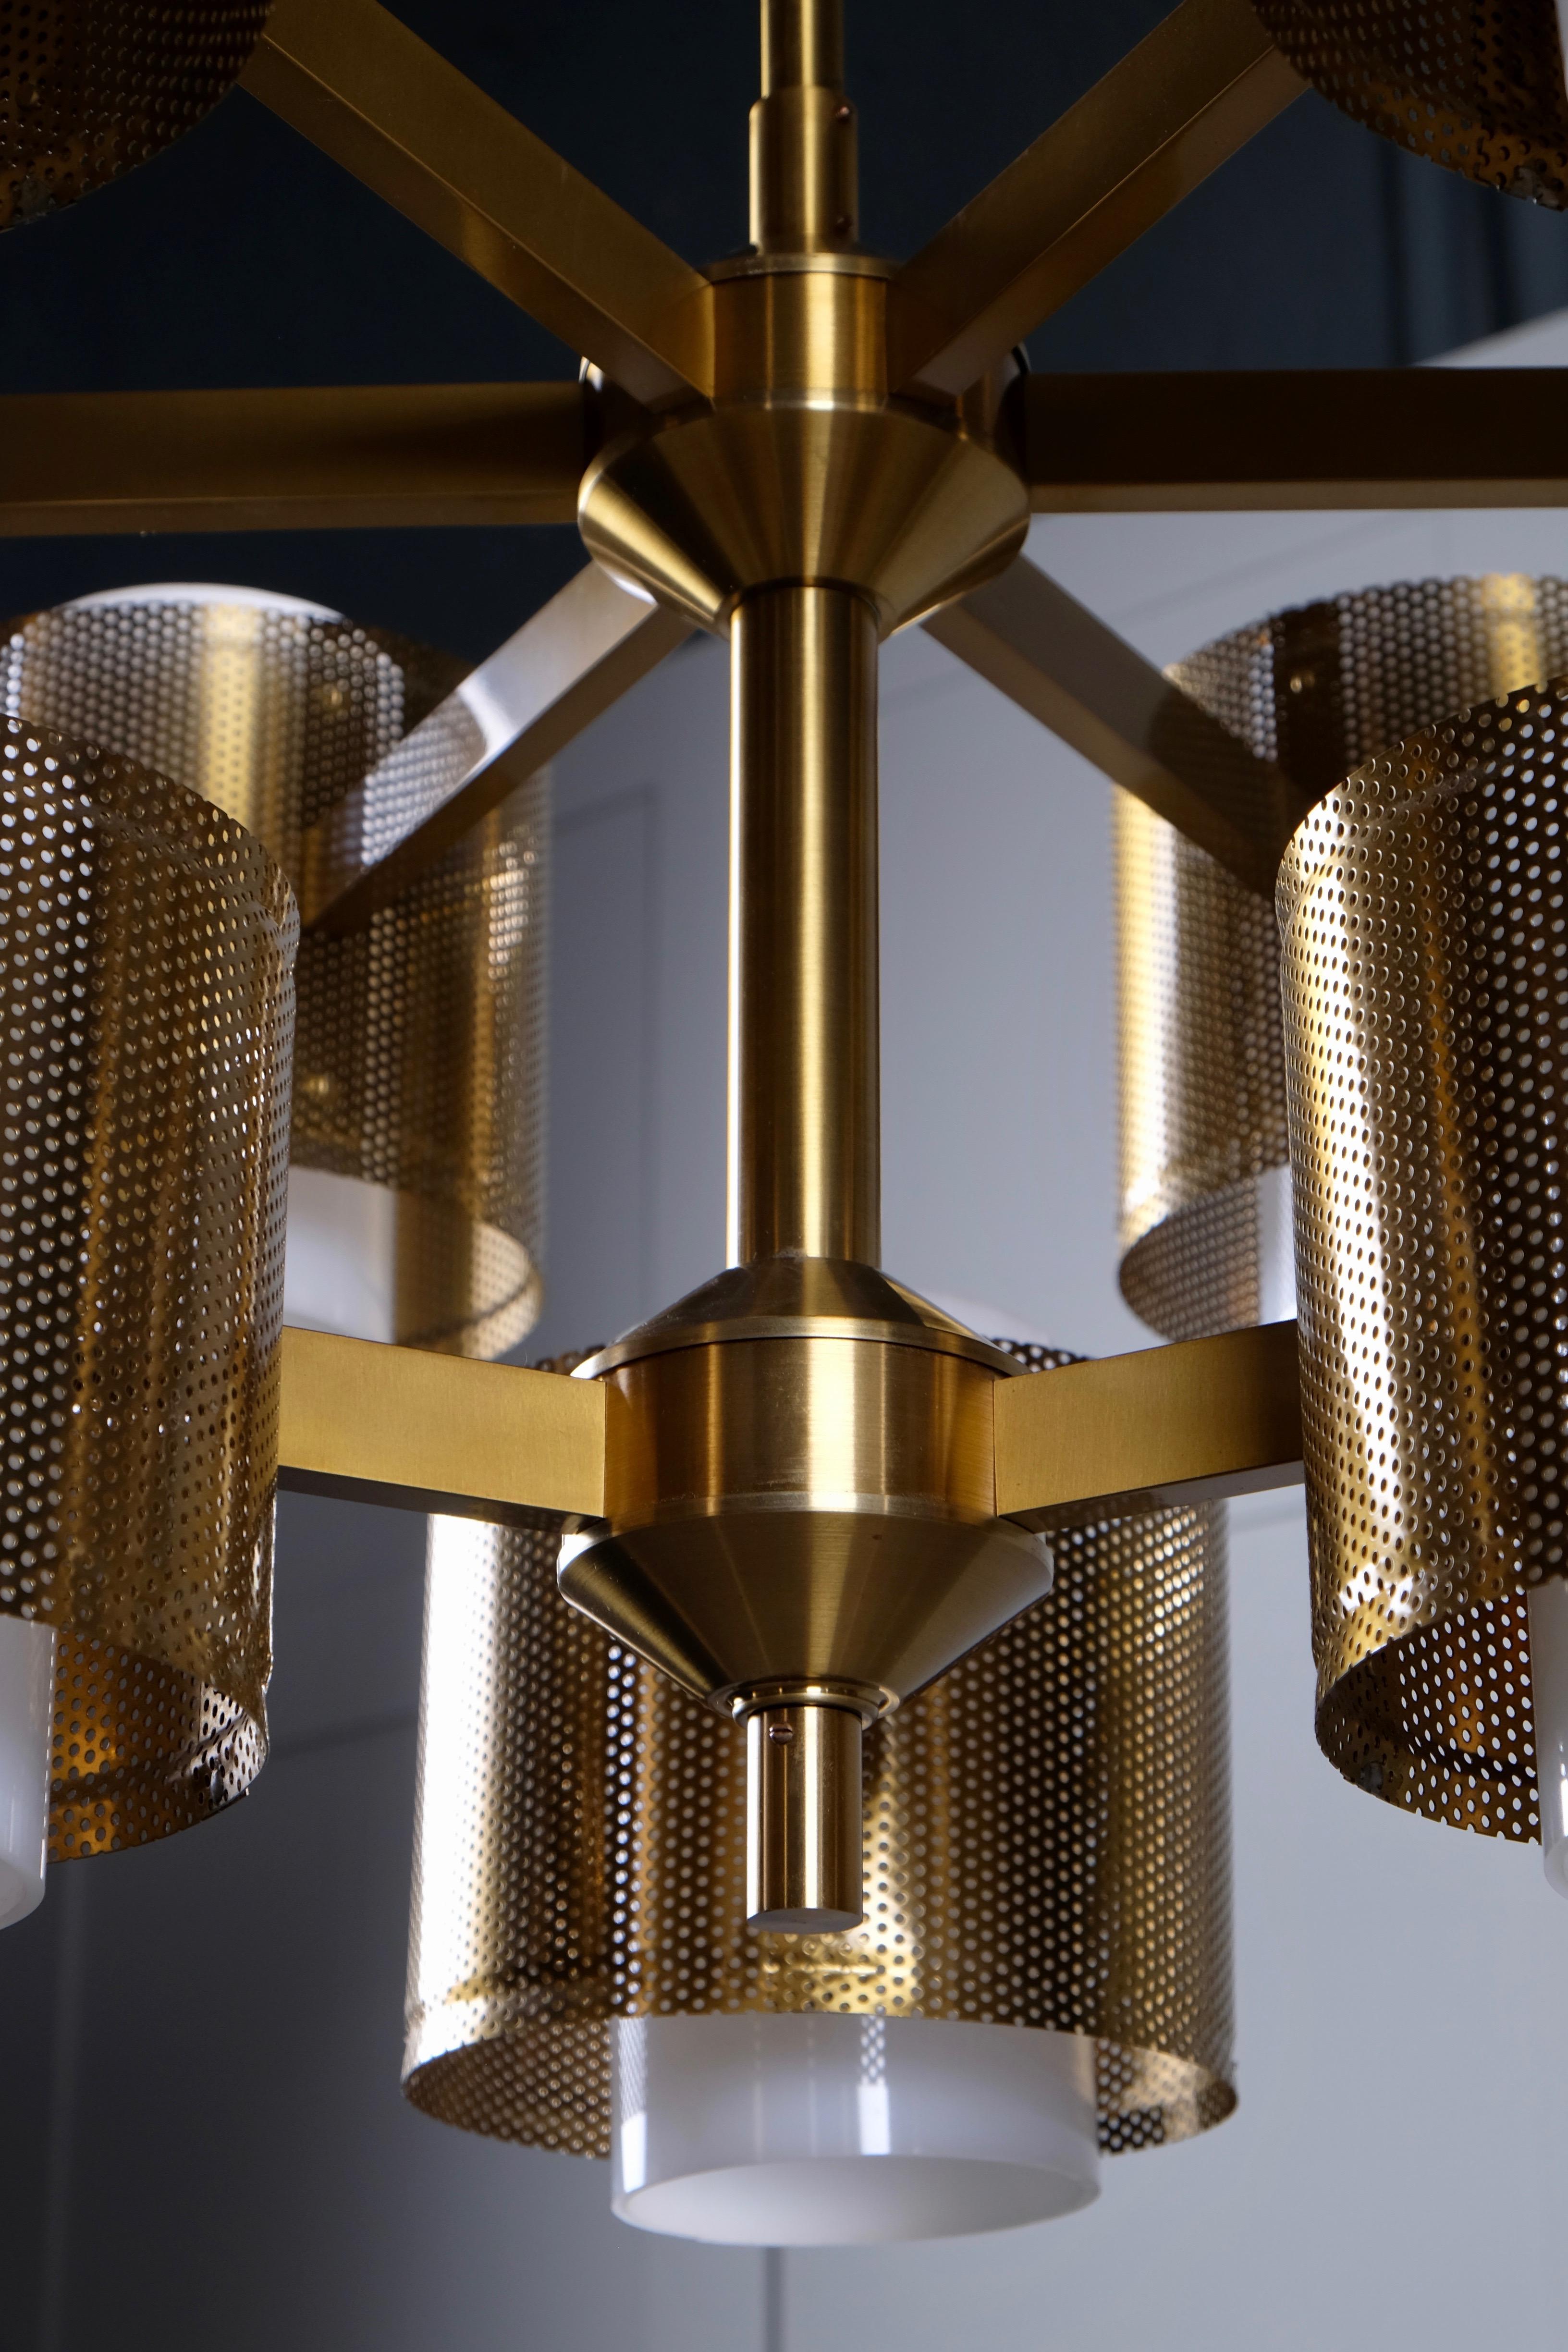 Set of 3 Brass Chandeliers by Holger Johansson, Sweden, 1960s For Sale 2